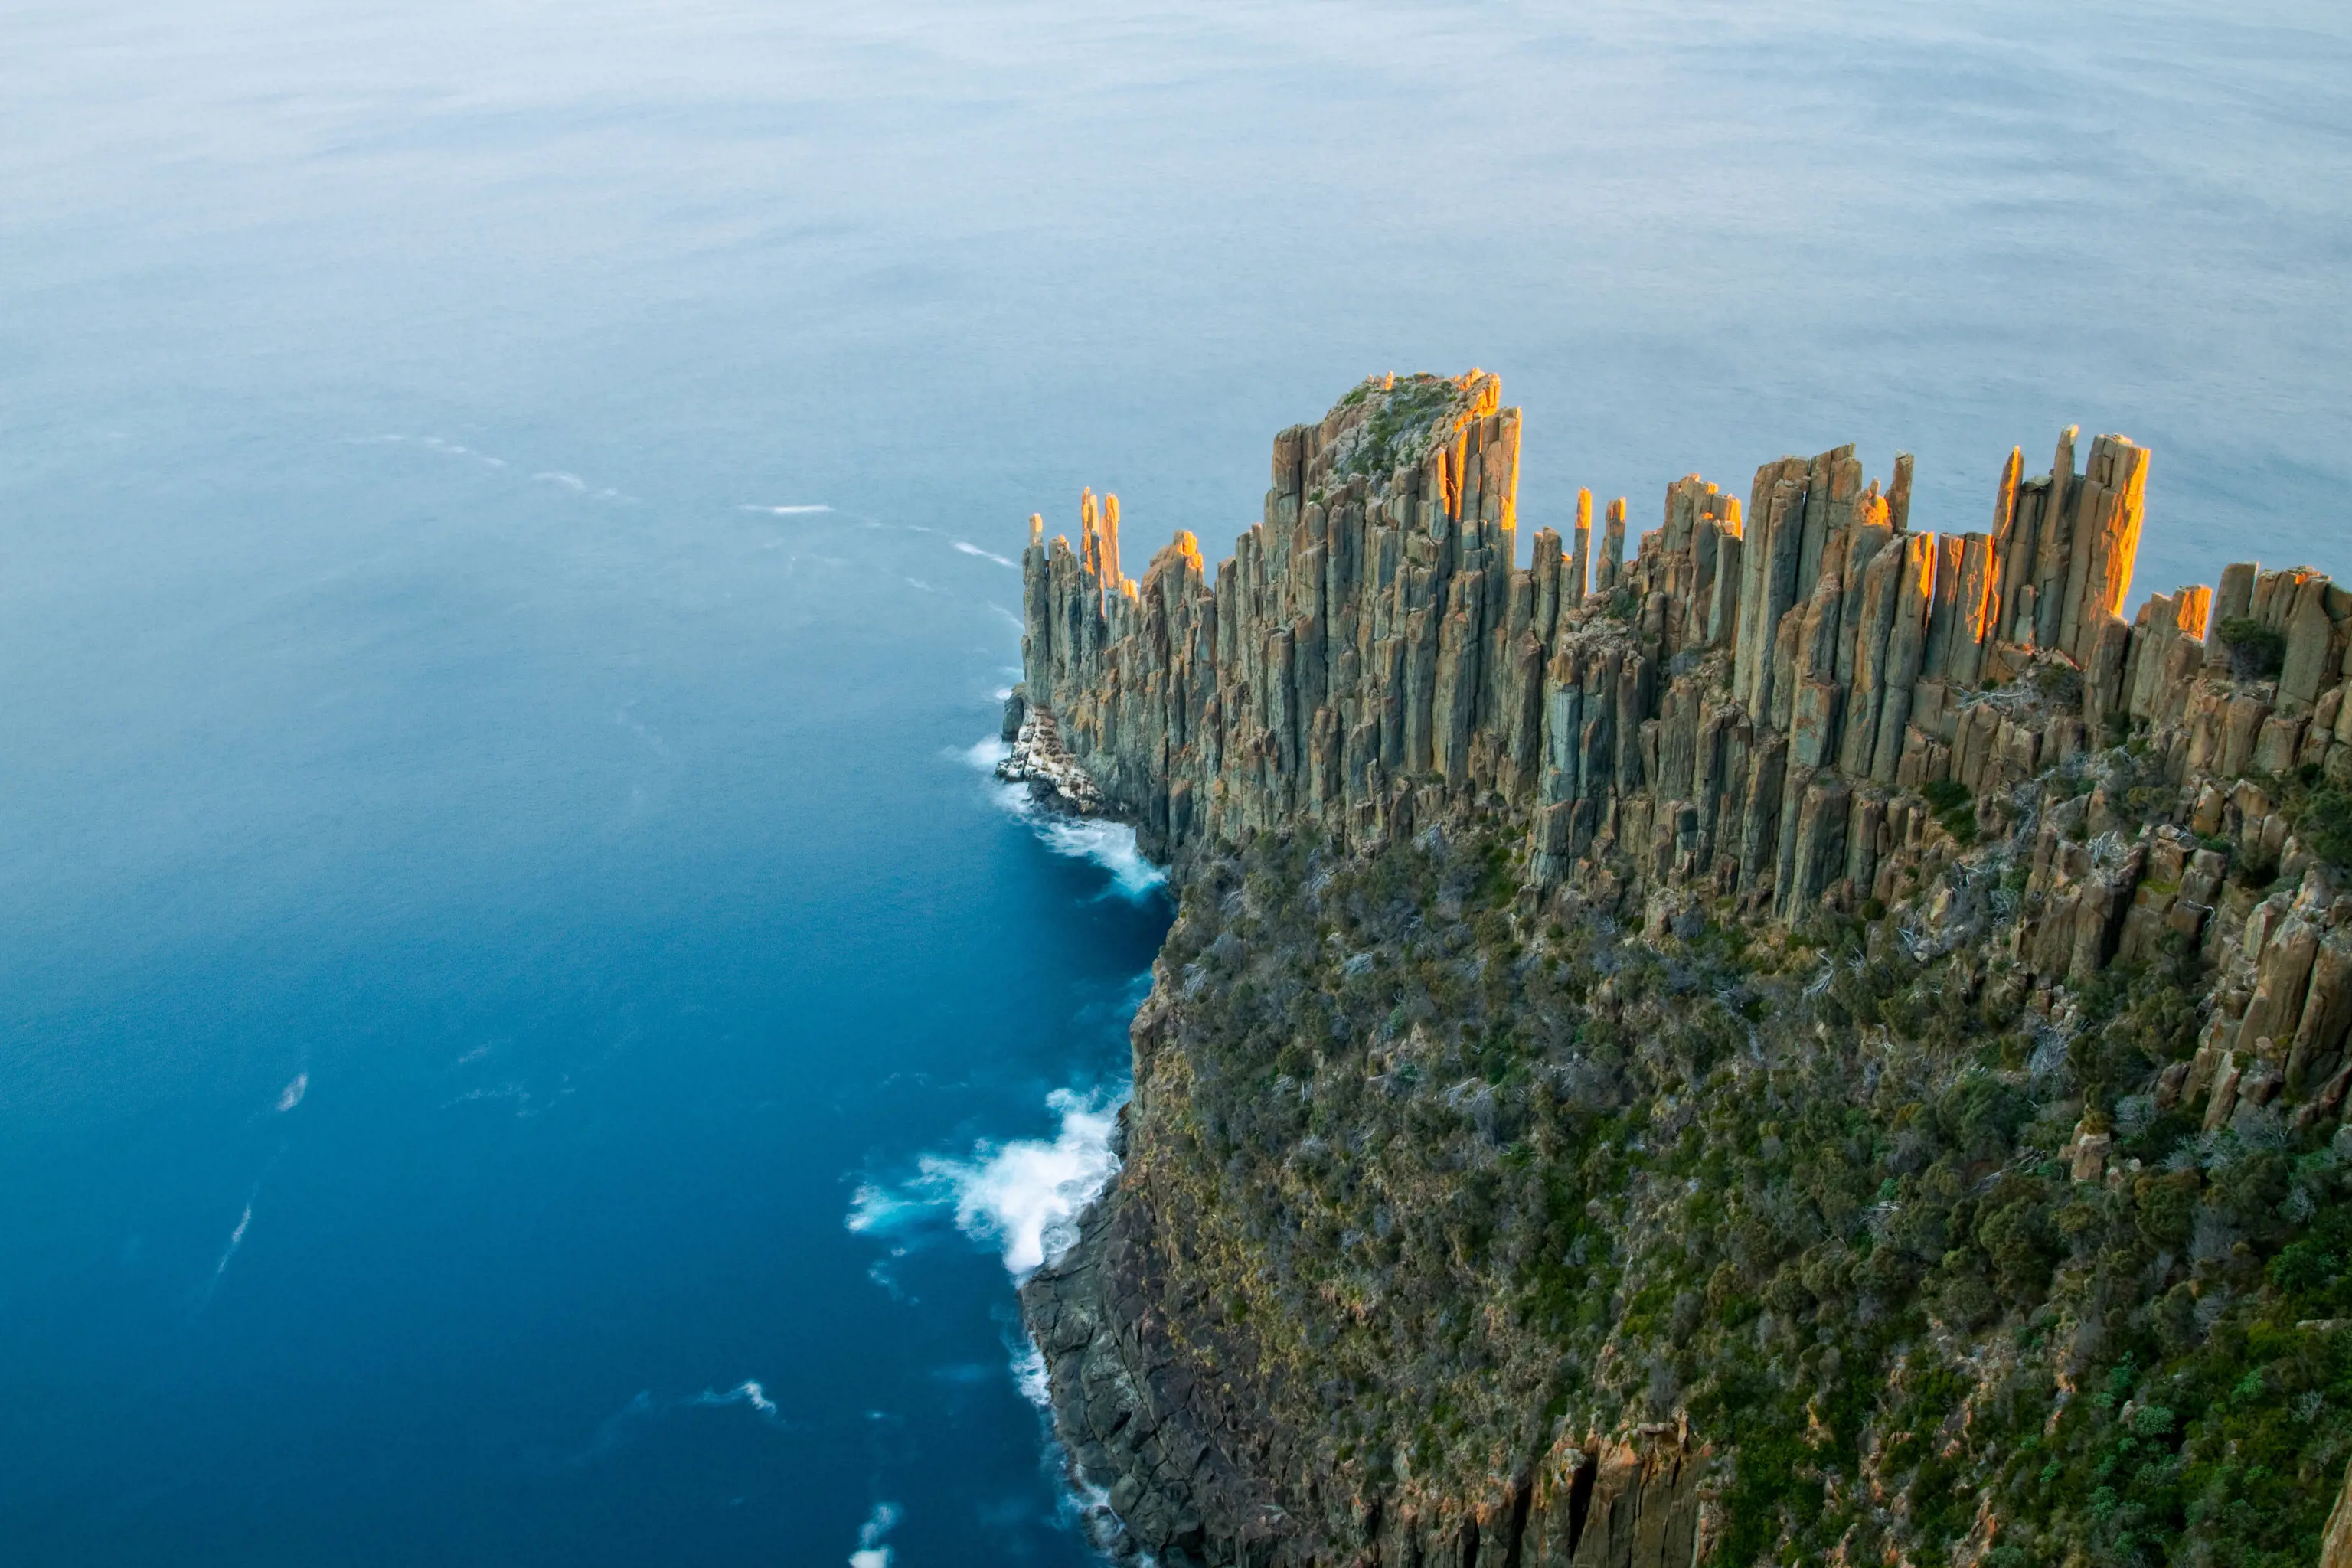 An aerial view looking at a headland jutting out into the sea, made up of distinctive column like rocks. Cape Raoul, Tasman National Park.